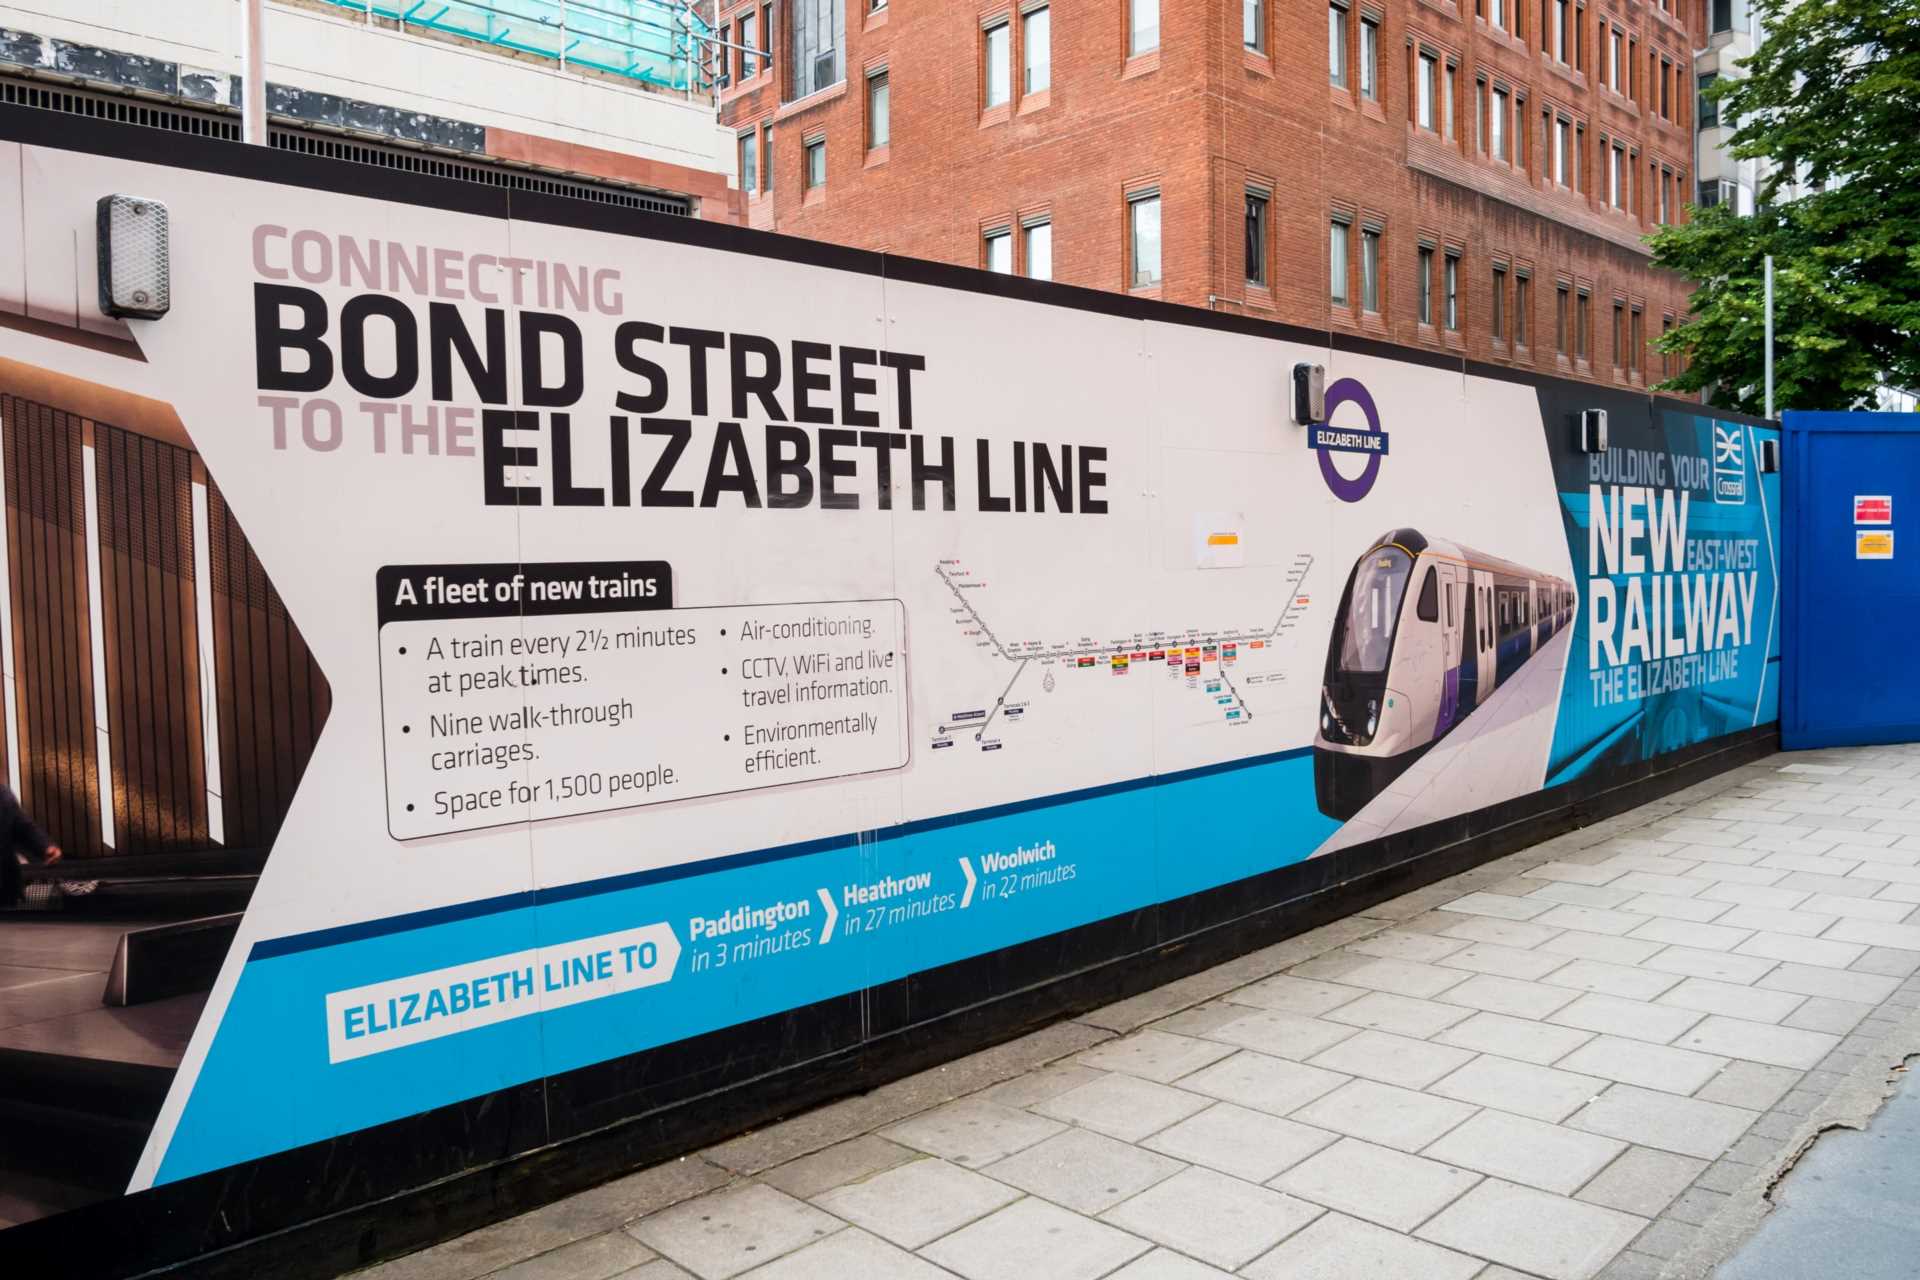 Elizabeth line at Bond Street Station finally opens to the public.